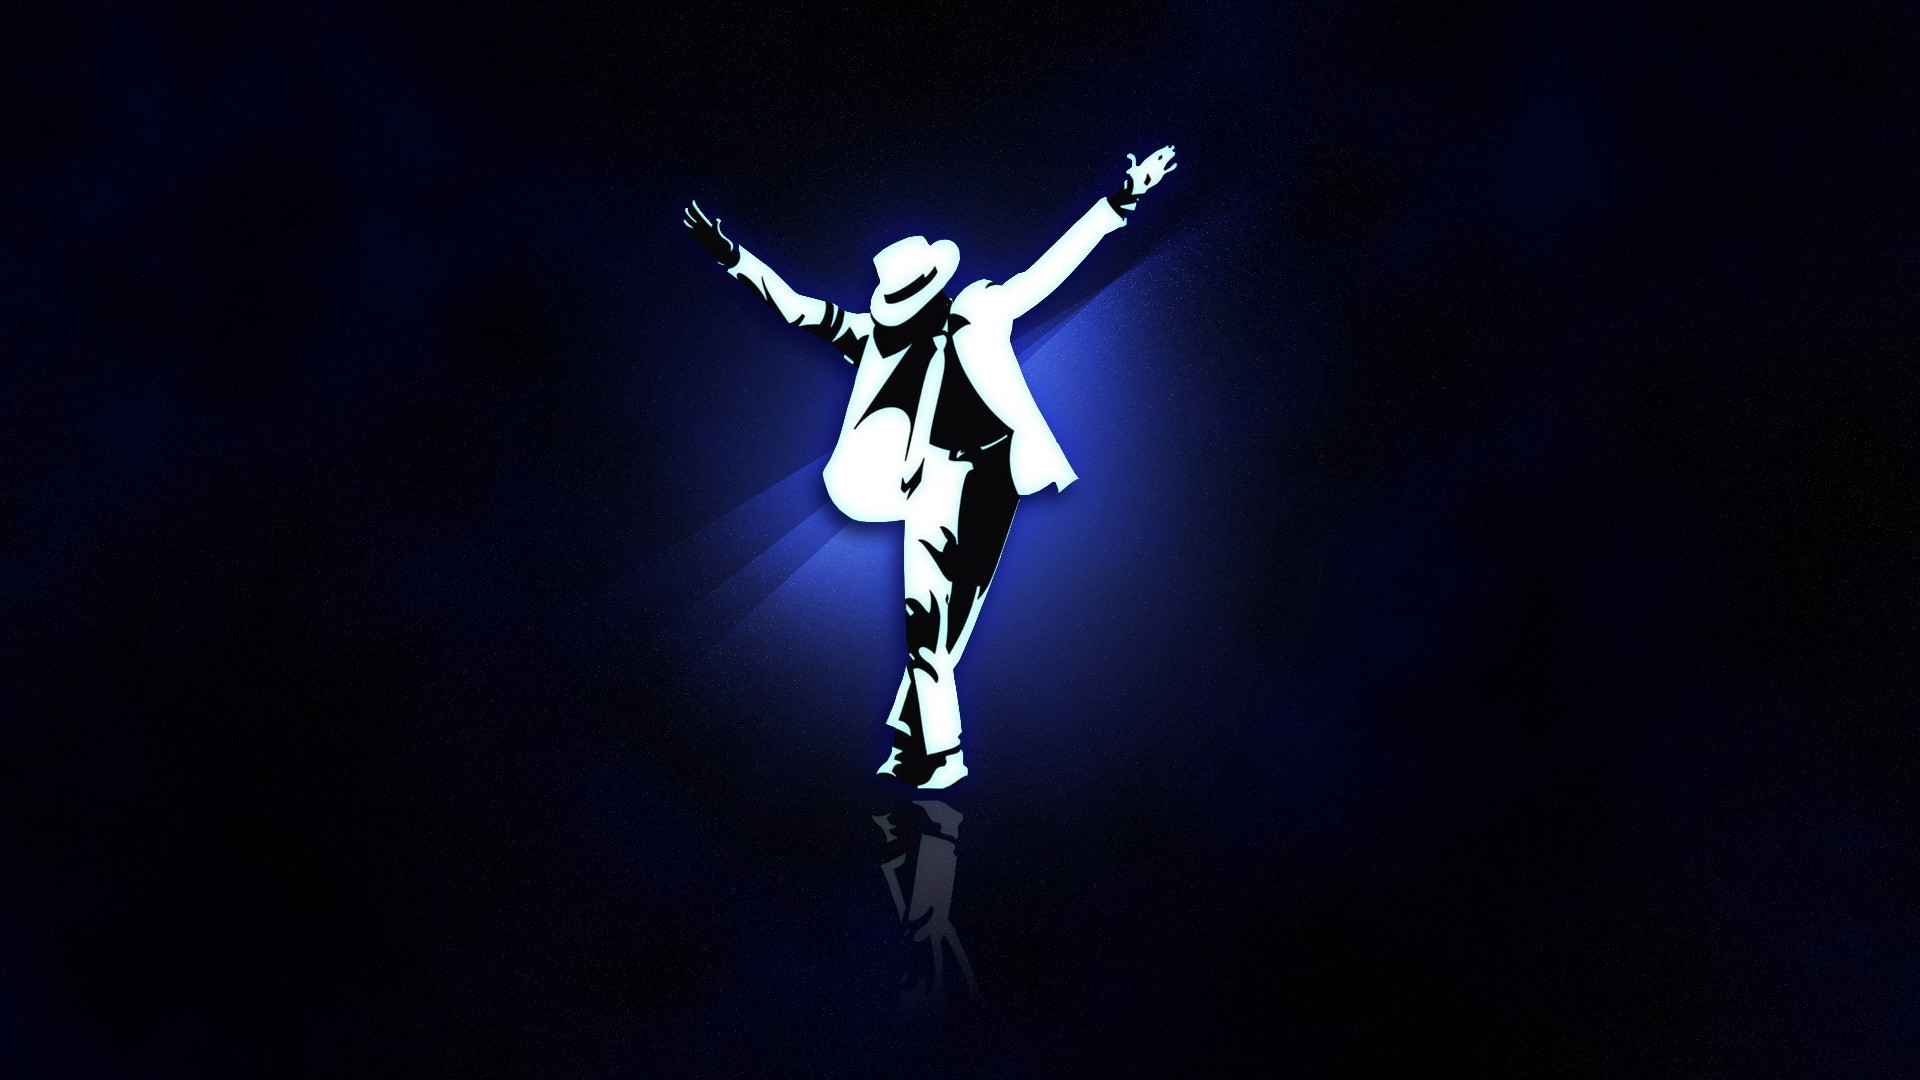 michael jackson images wallpapers #16